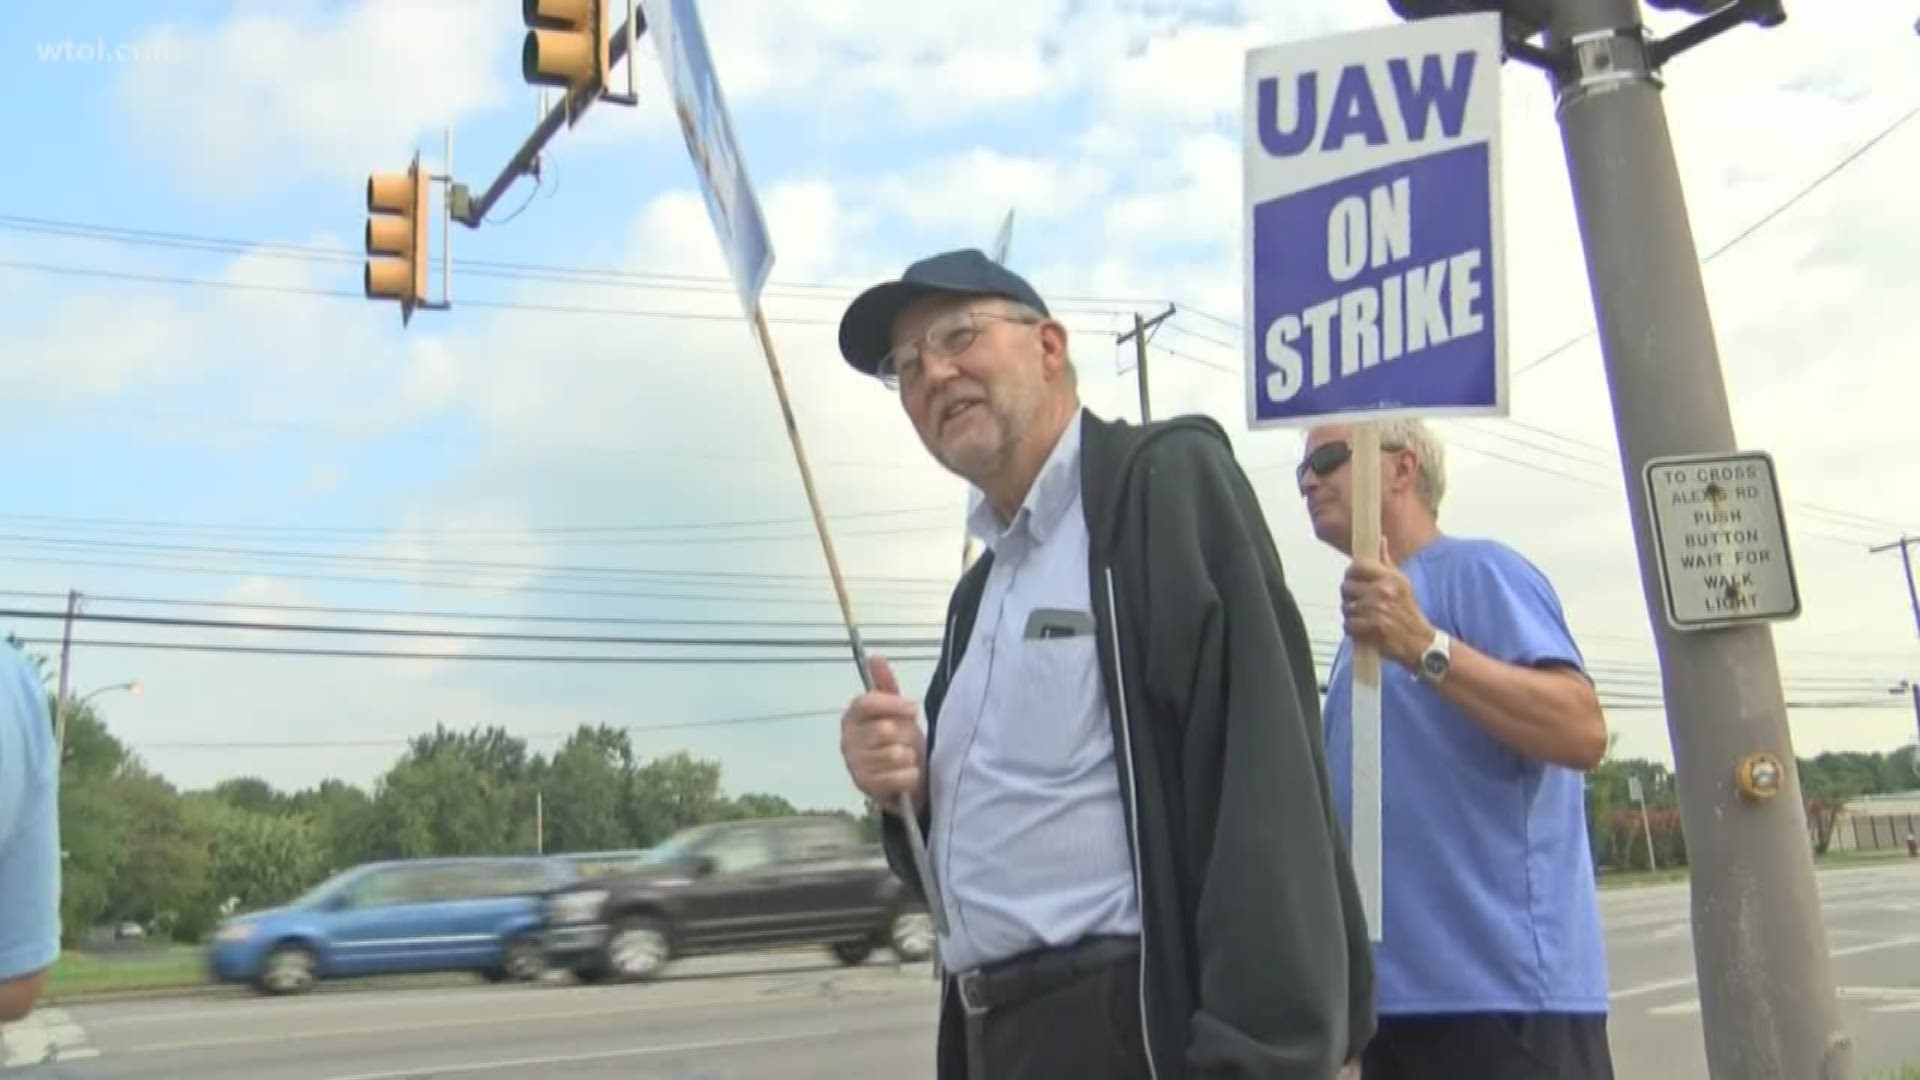 UAW Local 14 members say they are strong and determined to get the change they deserve in their workplace.